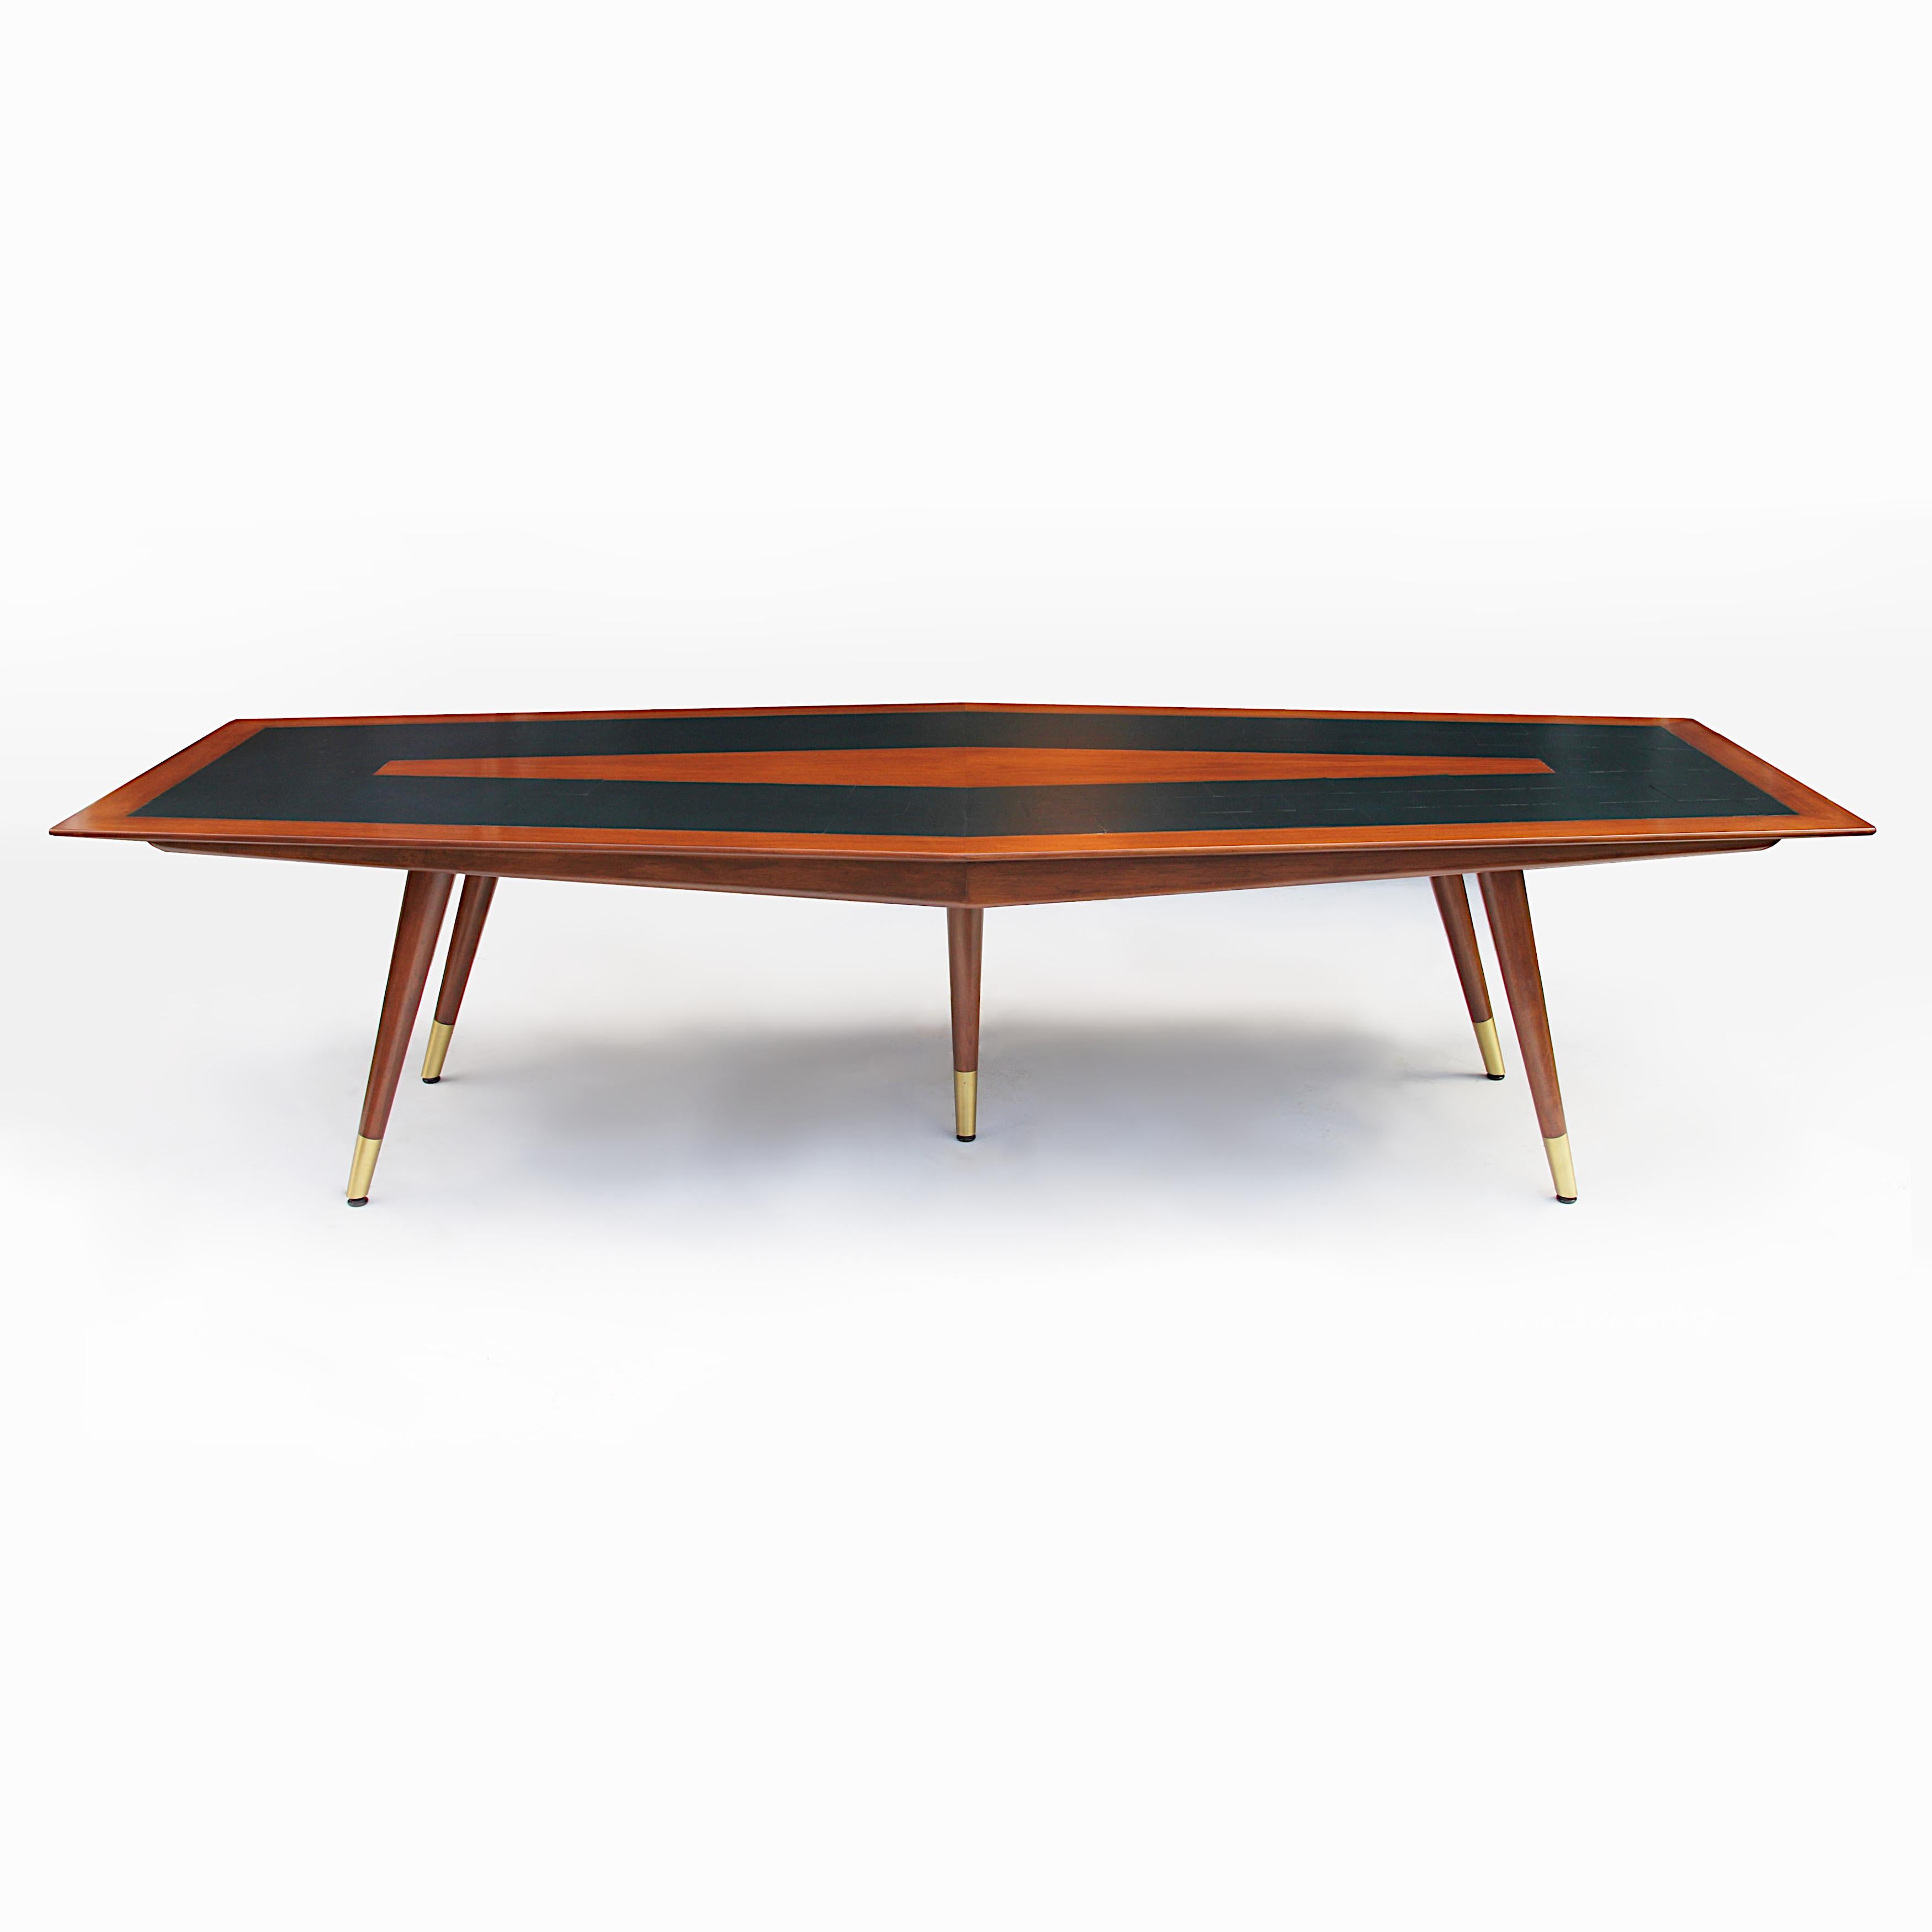 American Rare 10ft Walnut Mid-Century Modern Conference Dining Table by Giacomo Buzzitta For Sale